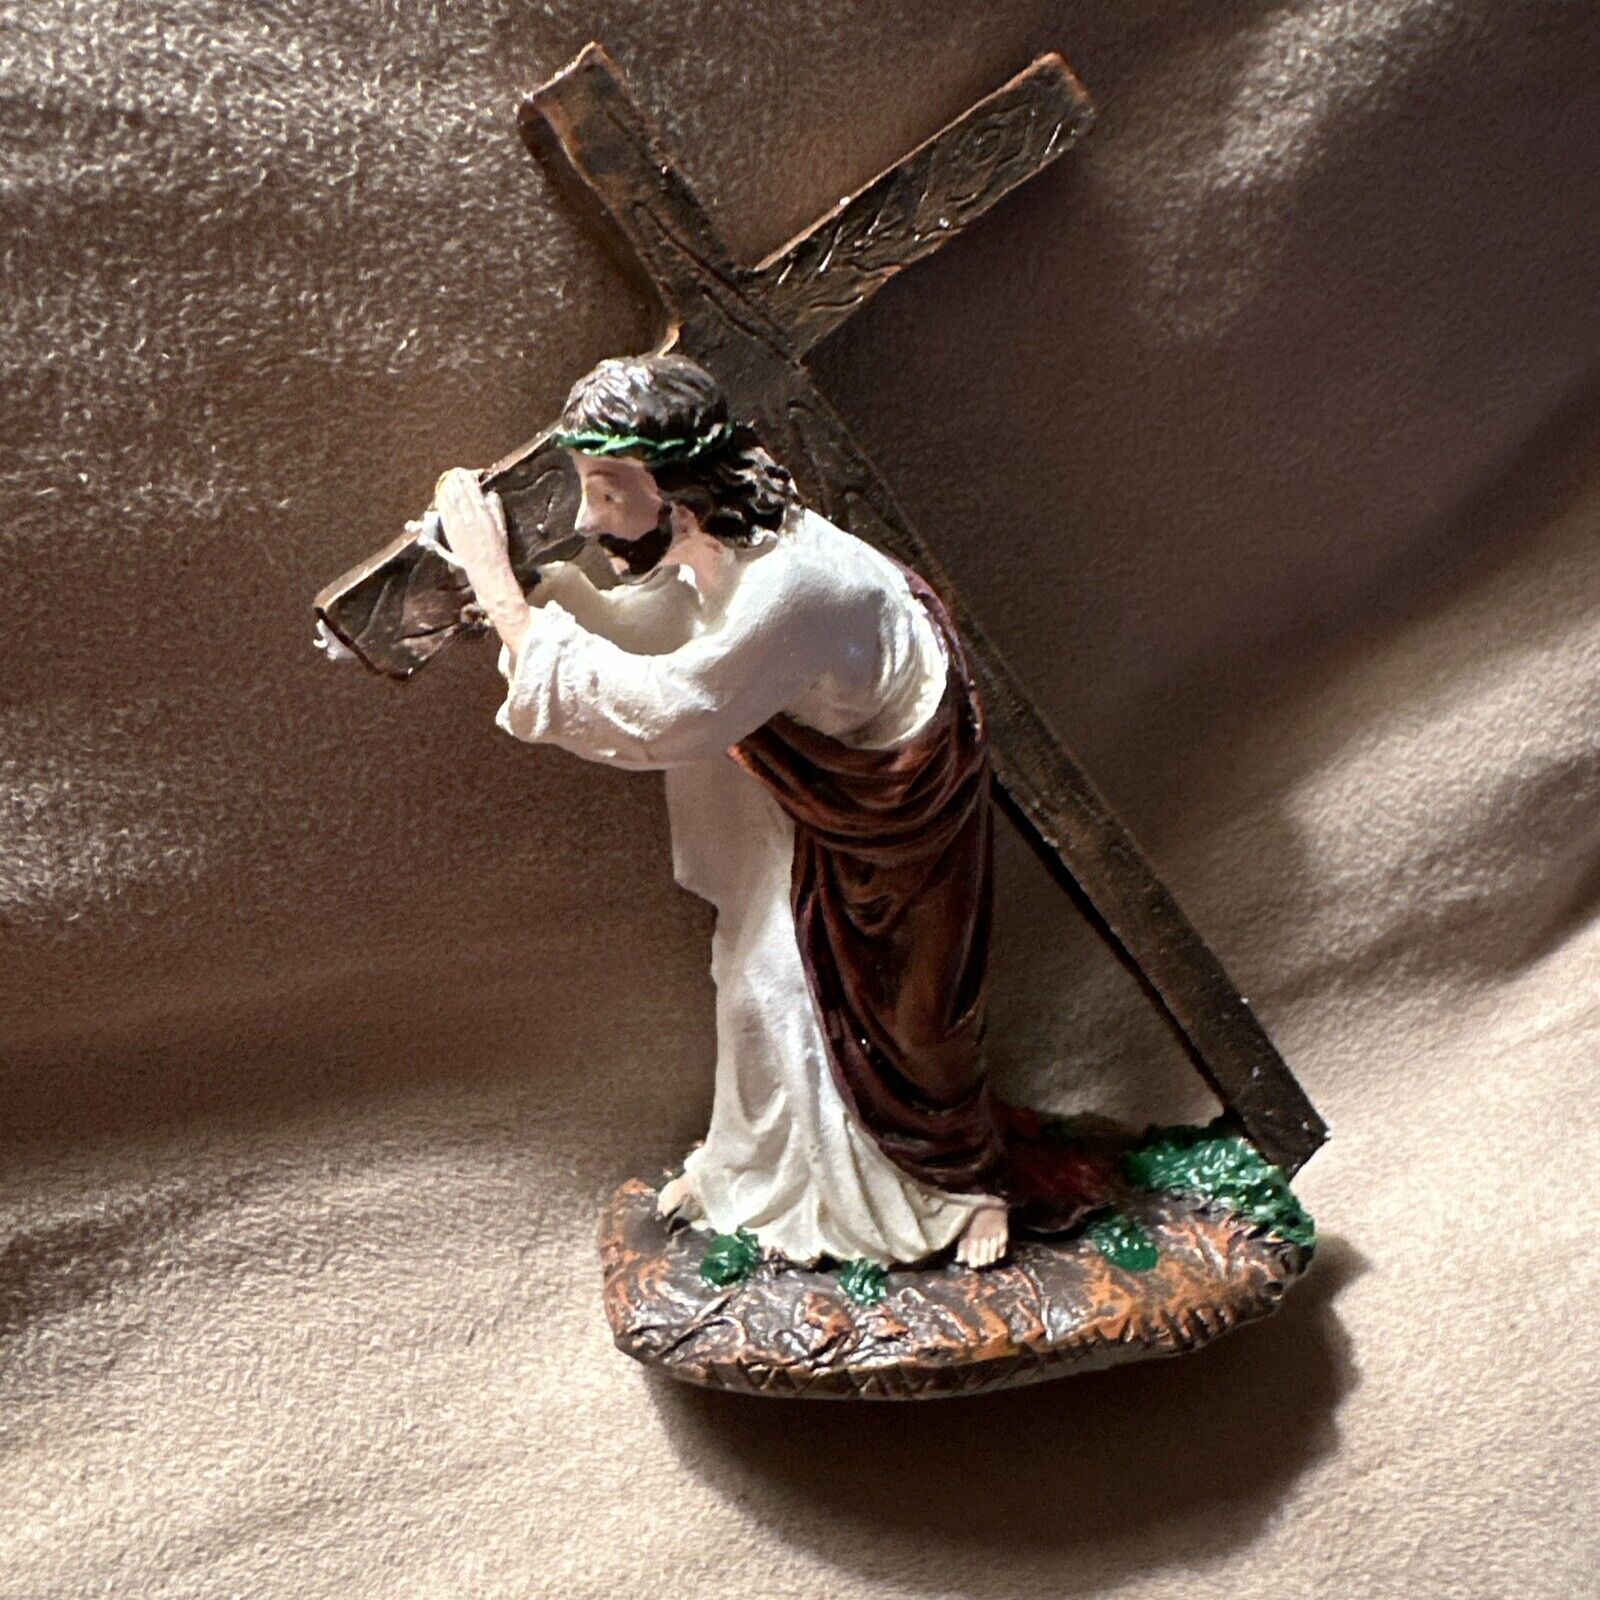 What A Beautuful Figurine With Jesus Christ Carrying His Cross To Be Crucified 